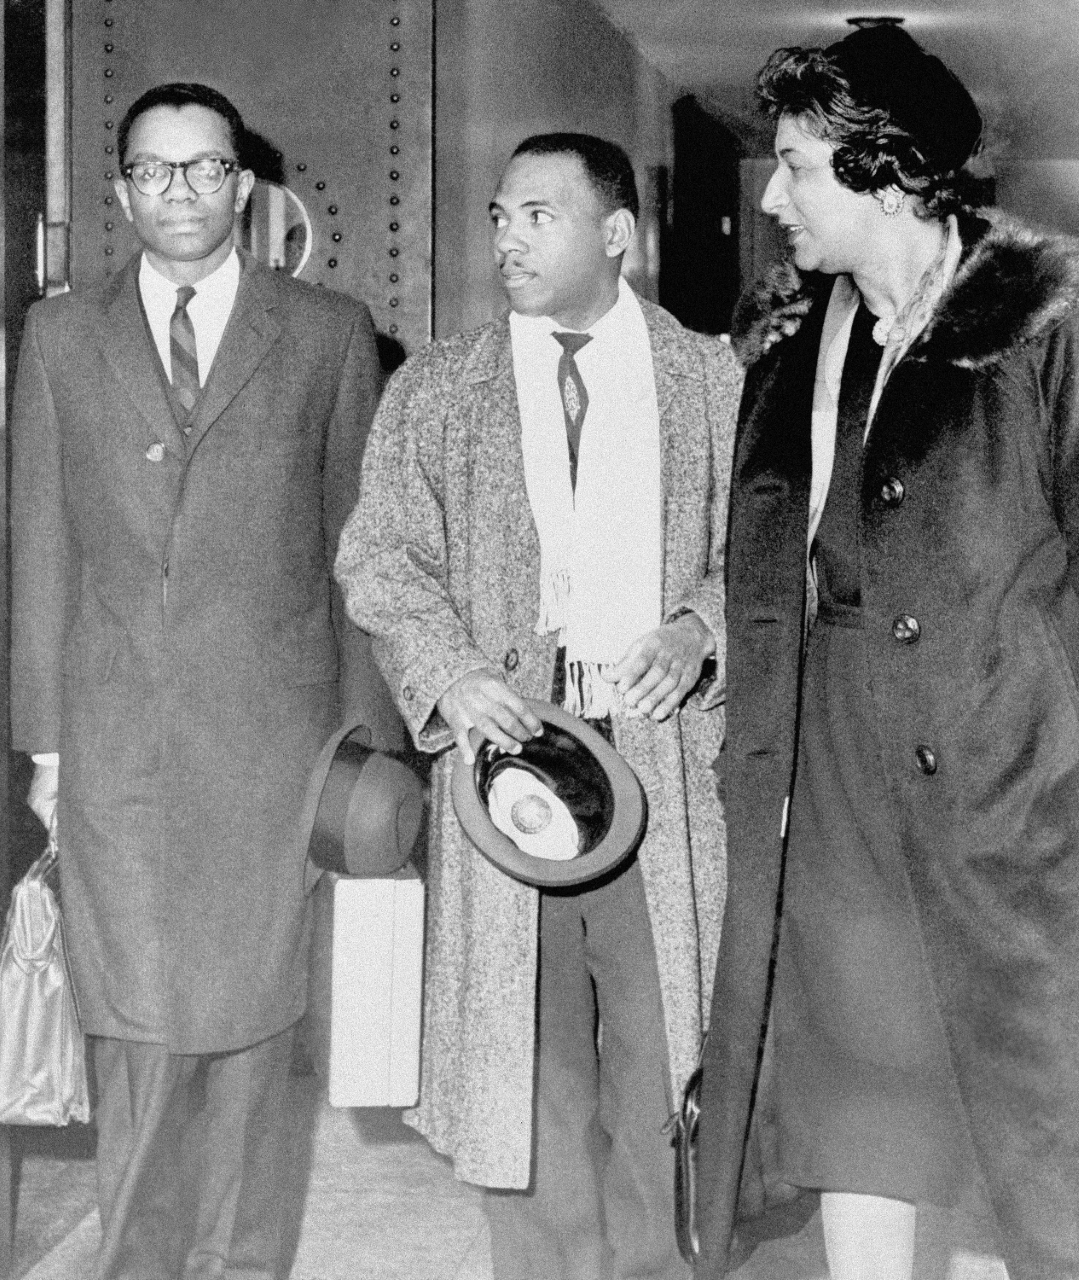 James Meredith, center, an Air Force veteran suing the State of Mississippi for admission to the all-white University of Mississippi, leaves federal court in Jackson, Miss., in this Jan. 16, 1962, file photo, for a noon break with attorneys Derrick Bell, left, and Constance Baker Motley, both of New York. (AP/File Photo)